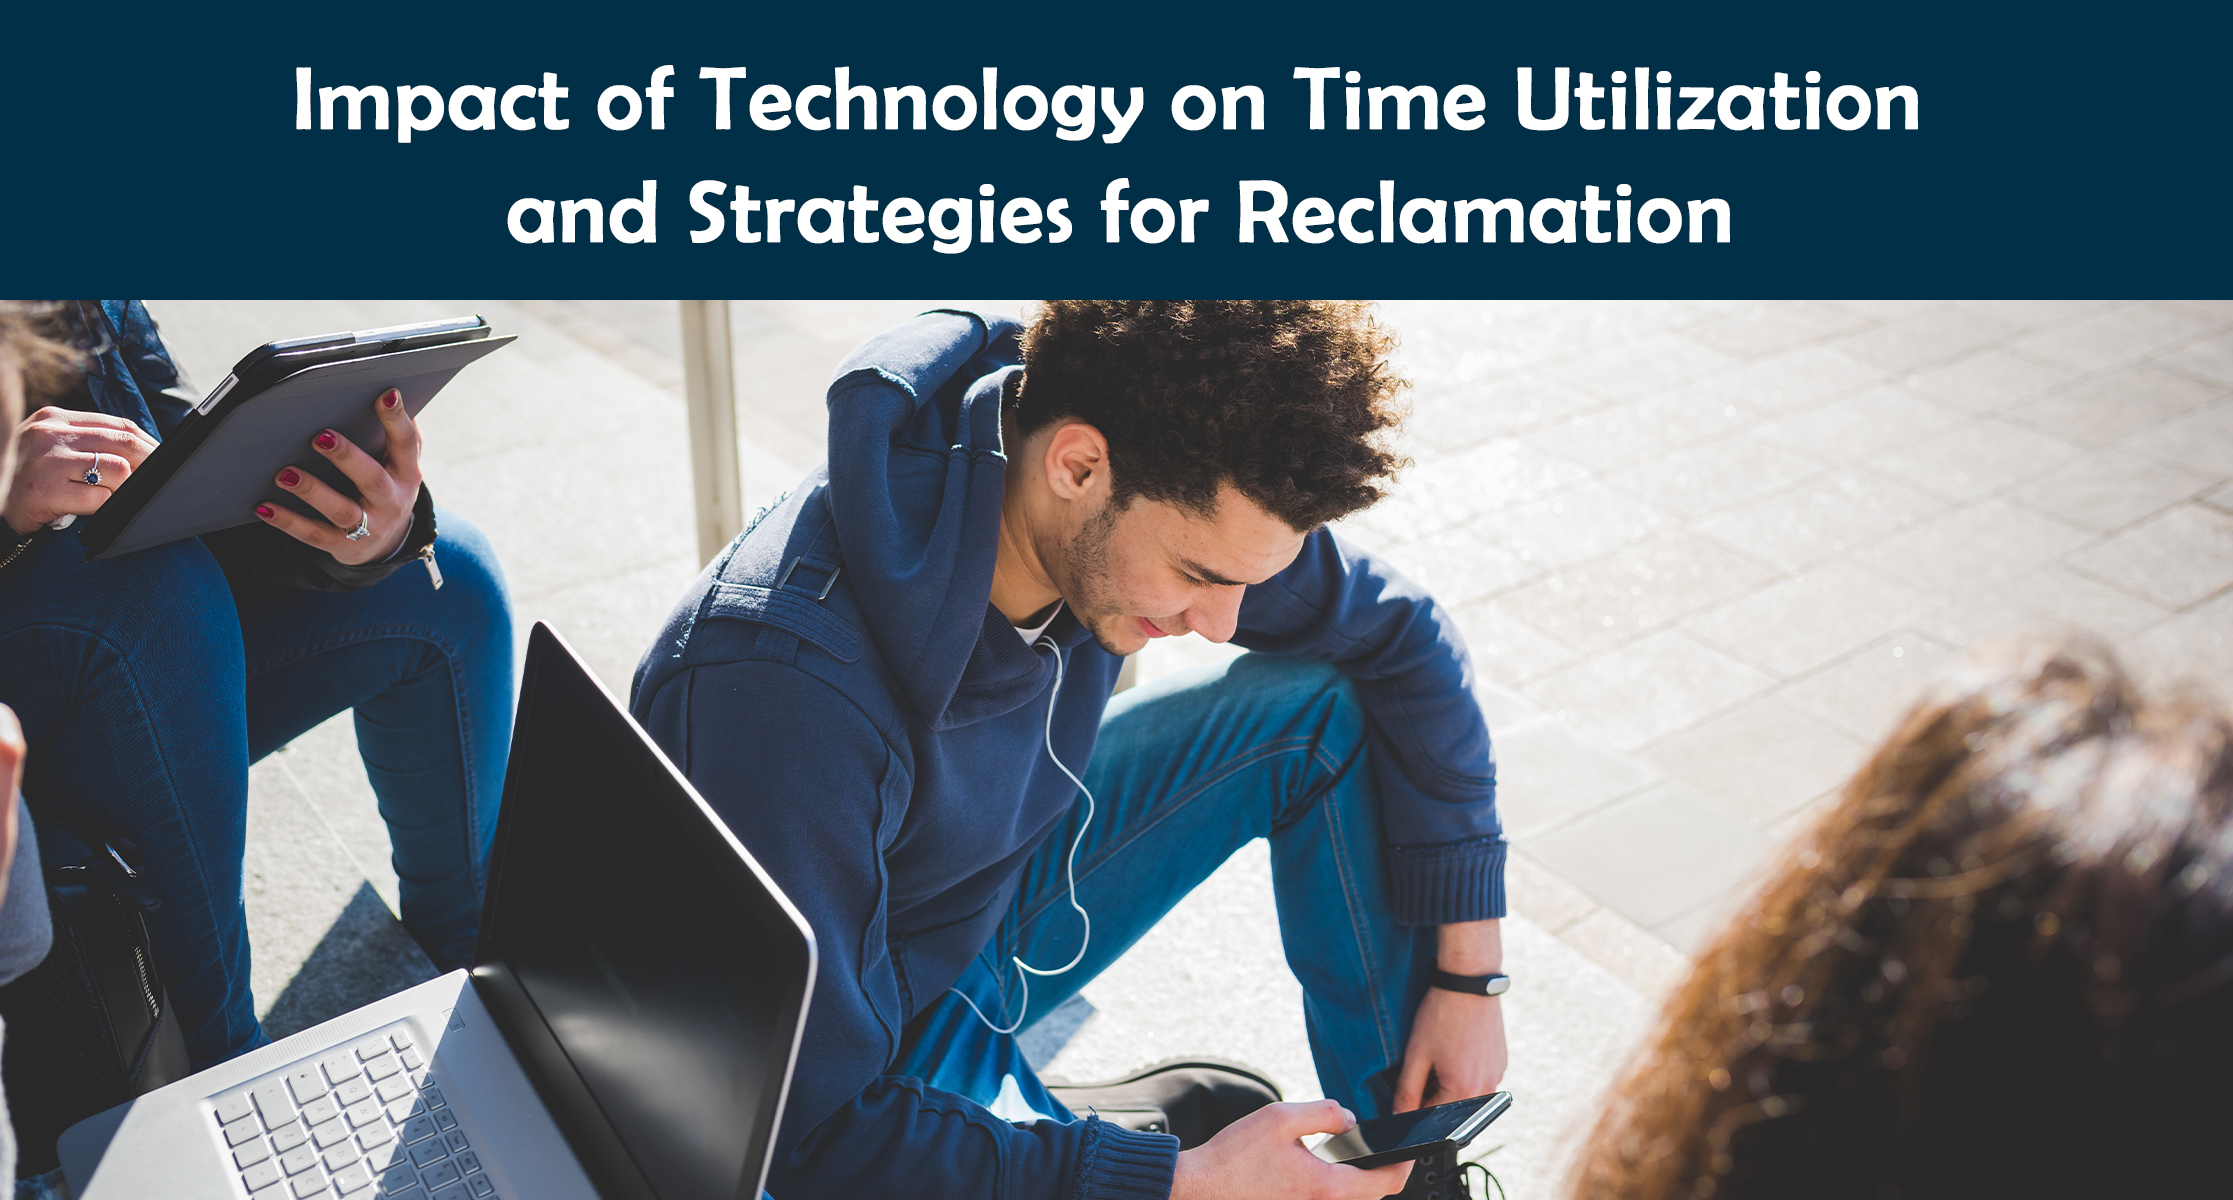 Impact of Technology on Time Utilization and Strategies for Reclamation